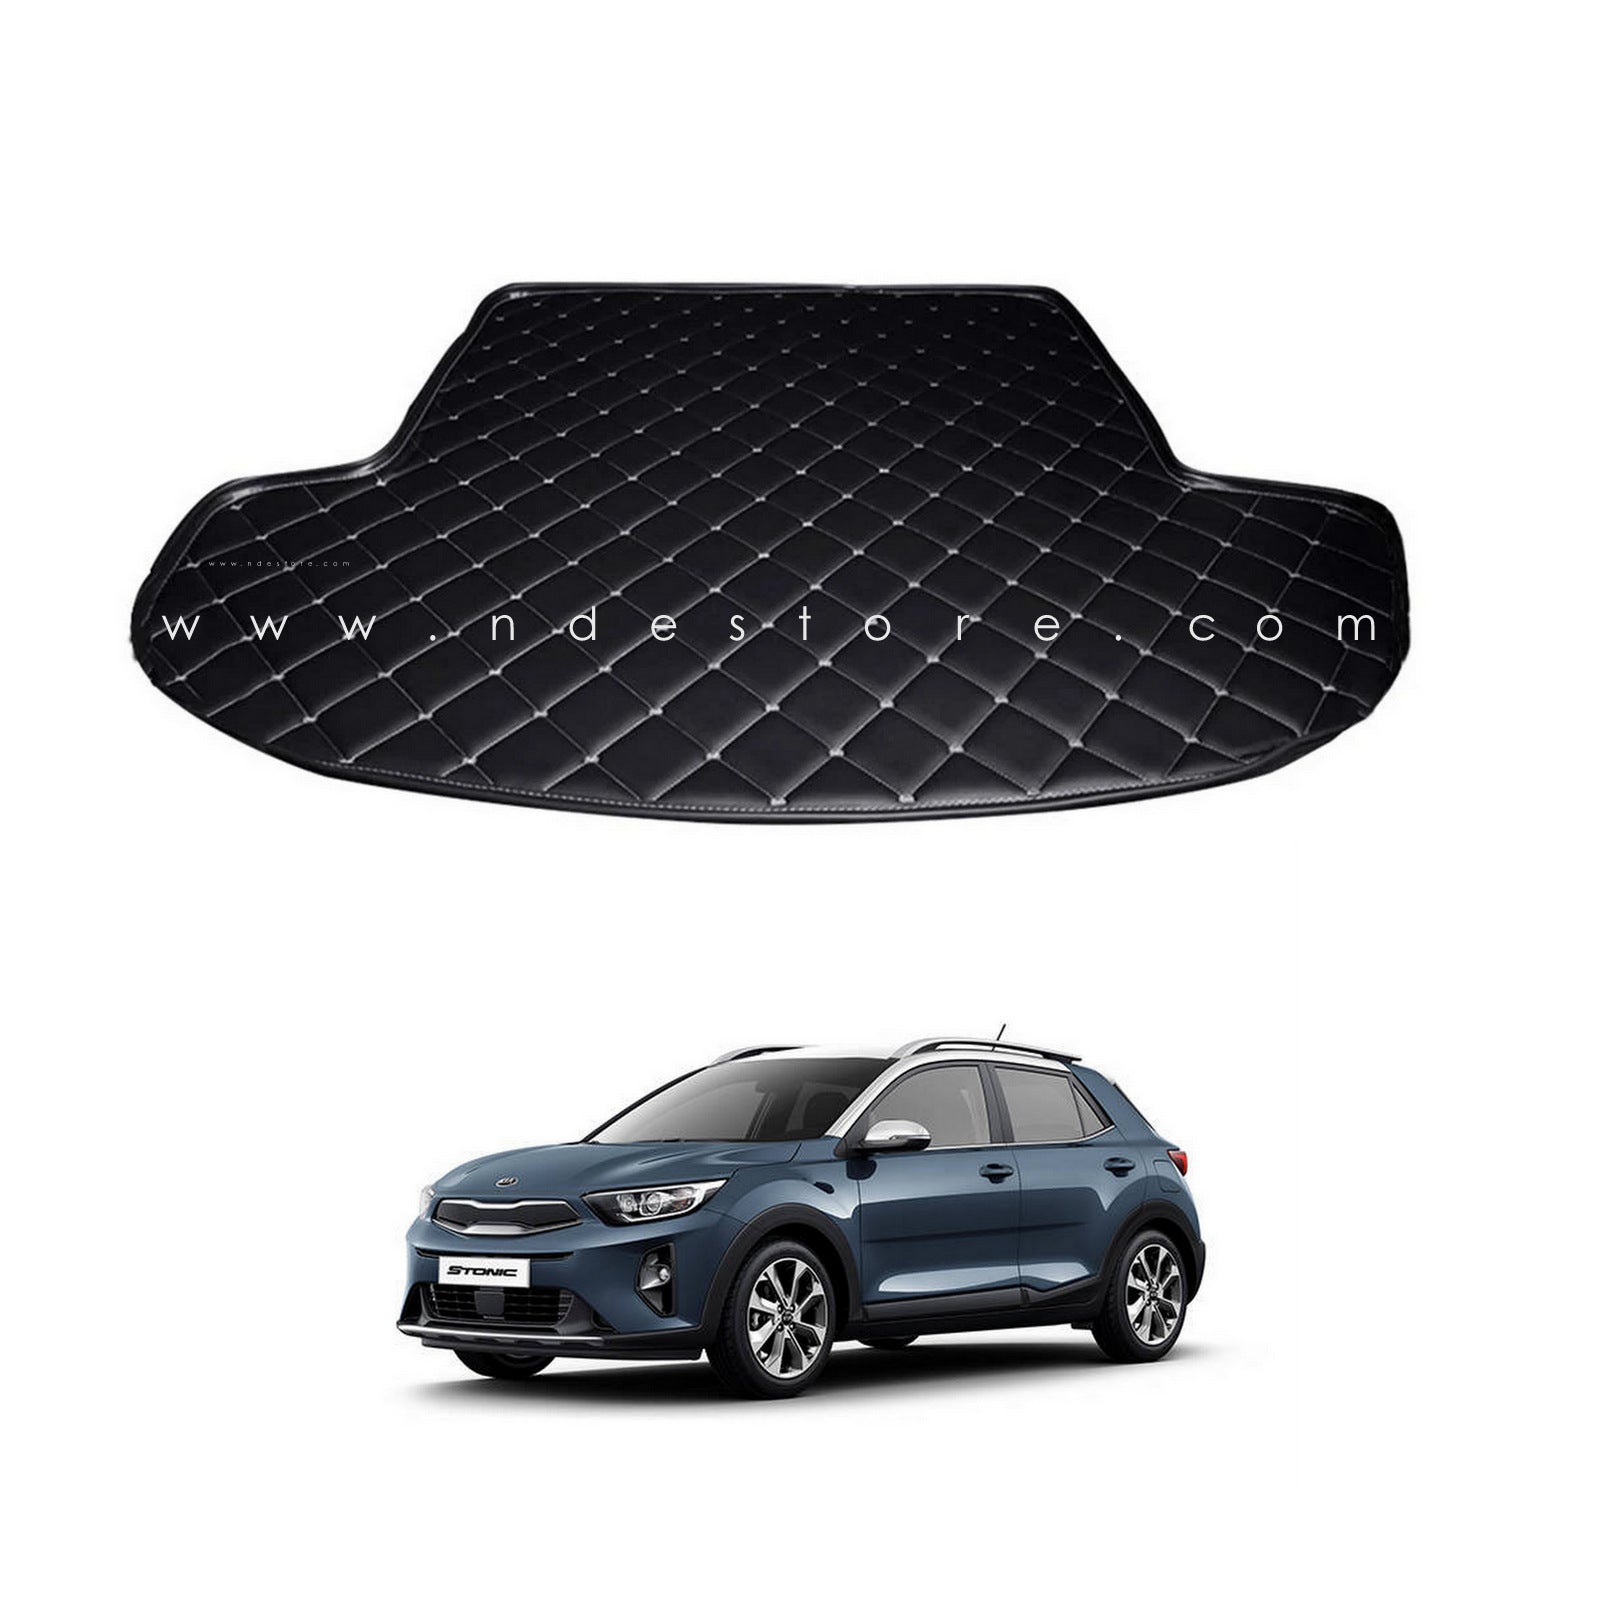 TOP COVER MICROFIBER FOR KIA STONIC - NDE STORE